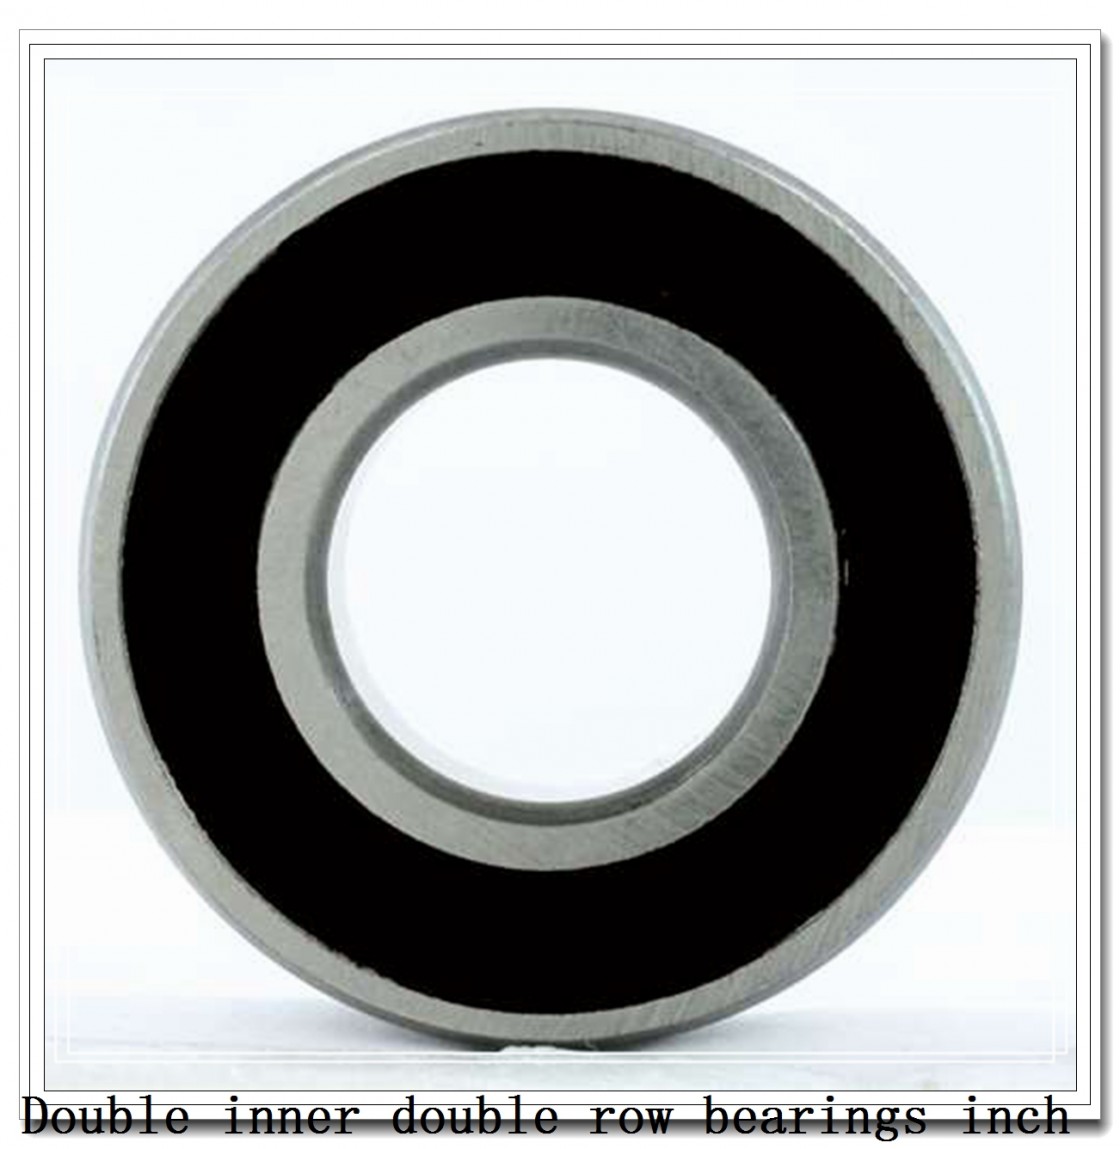 795/792D Double inner double row bearings inch